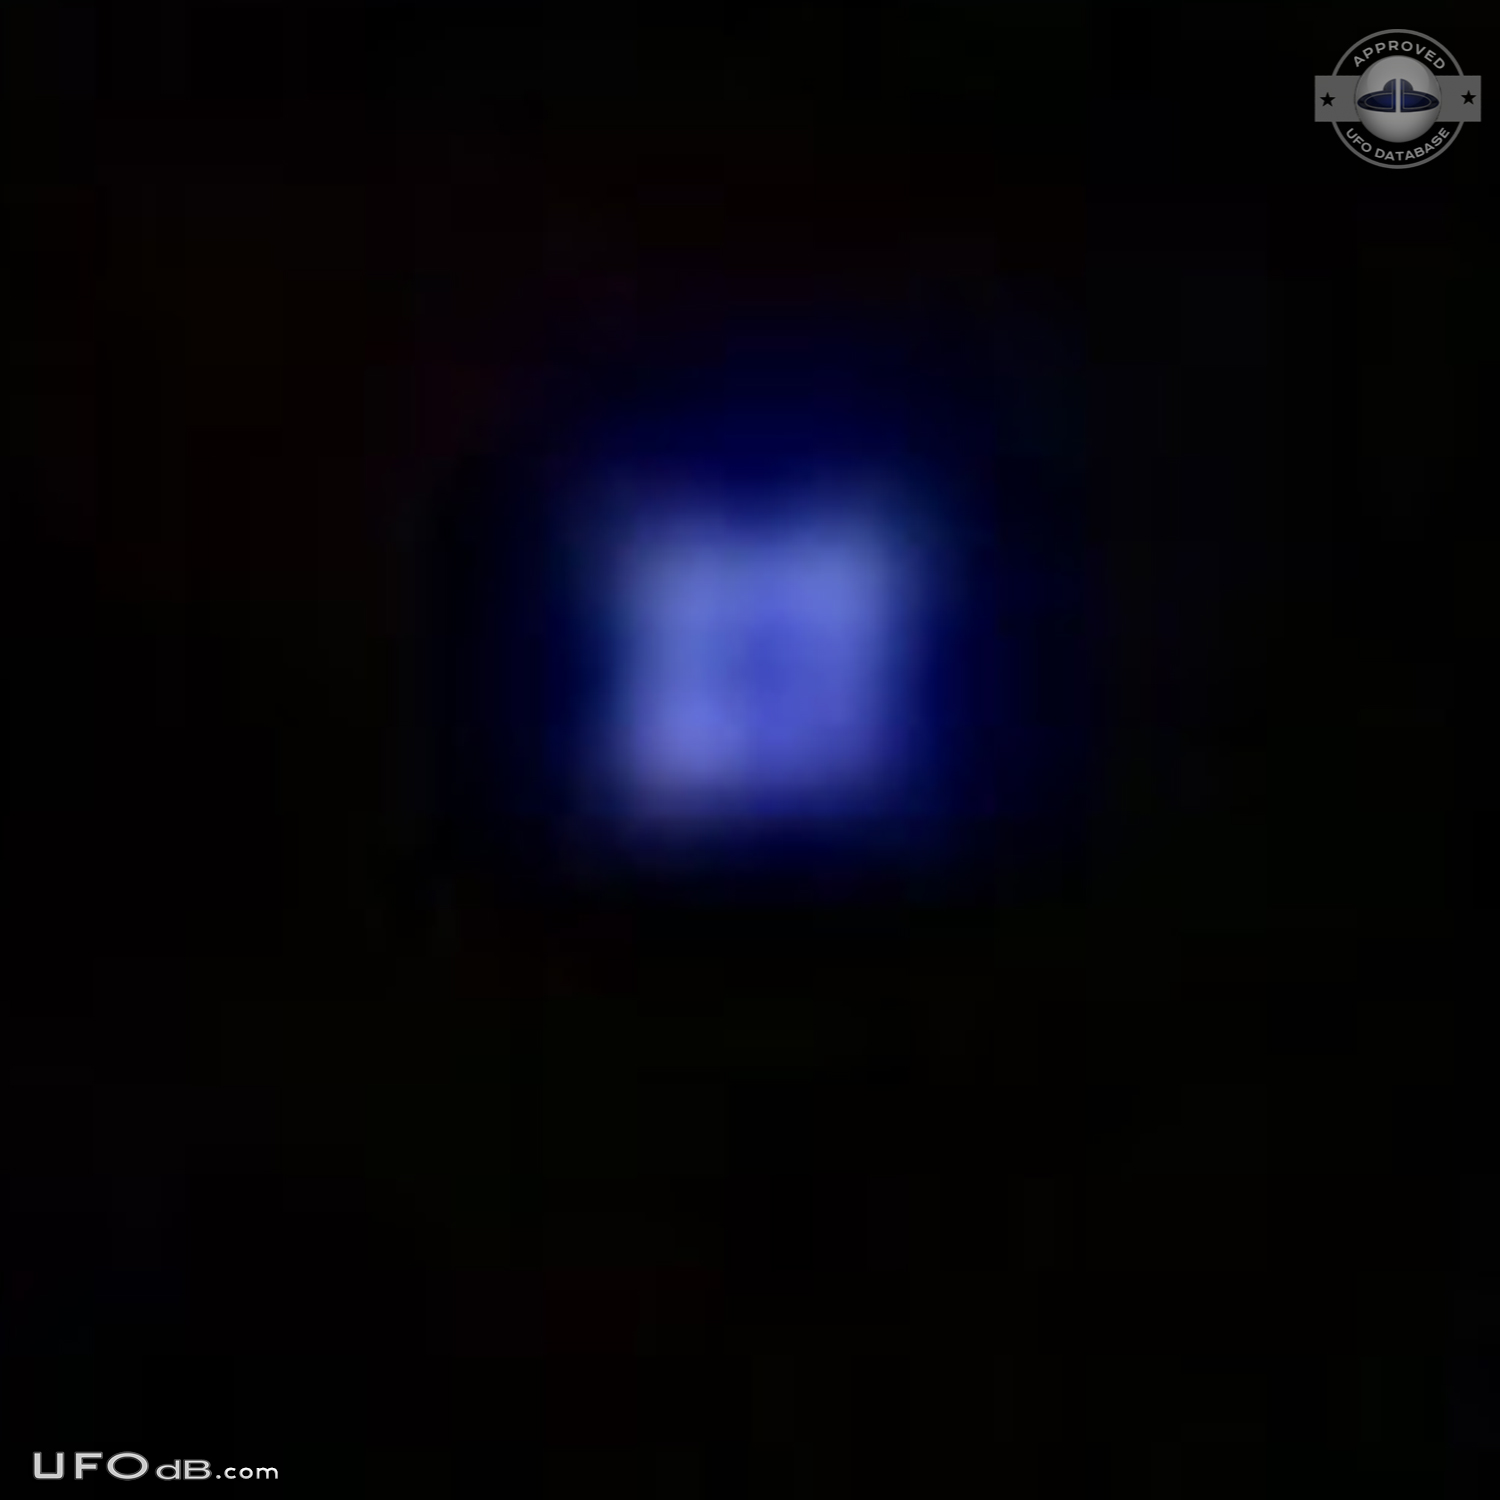 FAA AP certified person knew this was NOT a plane Houston Texas 2014 UFO Picture #650-4